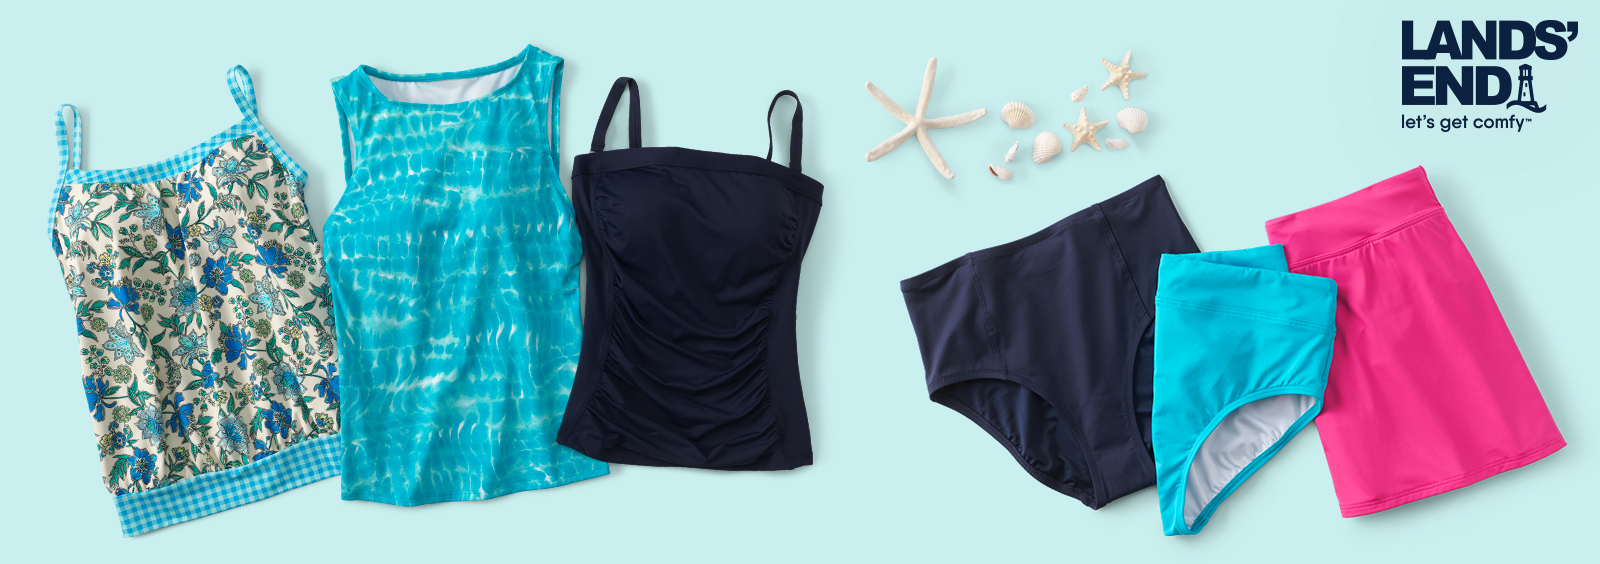 How Often Should You Buy New Bathing Suits